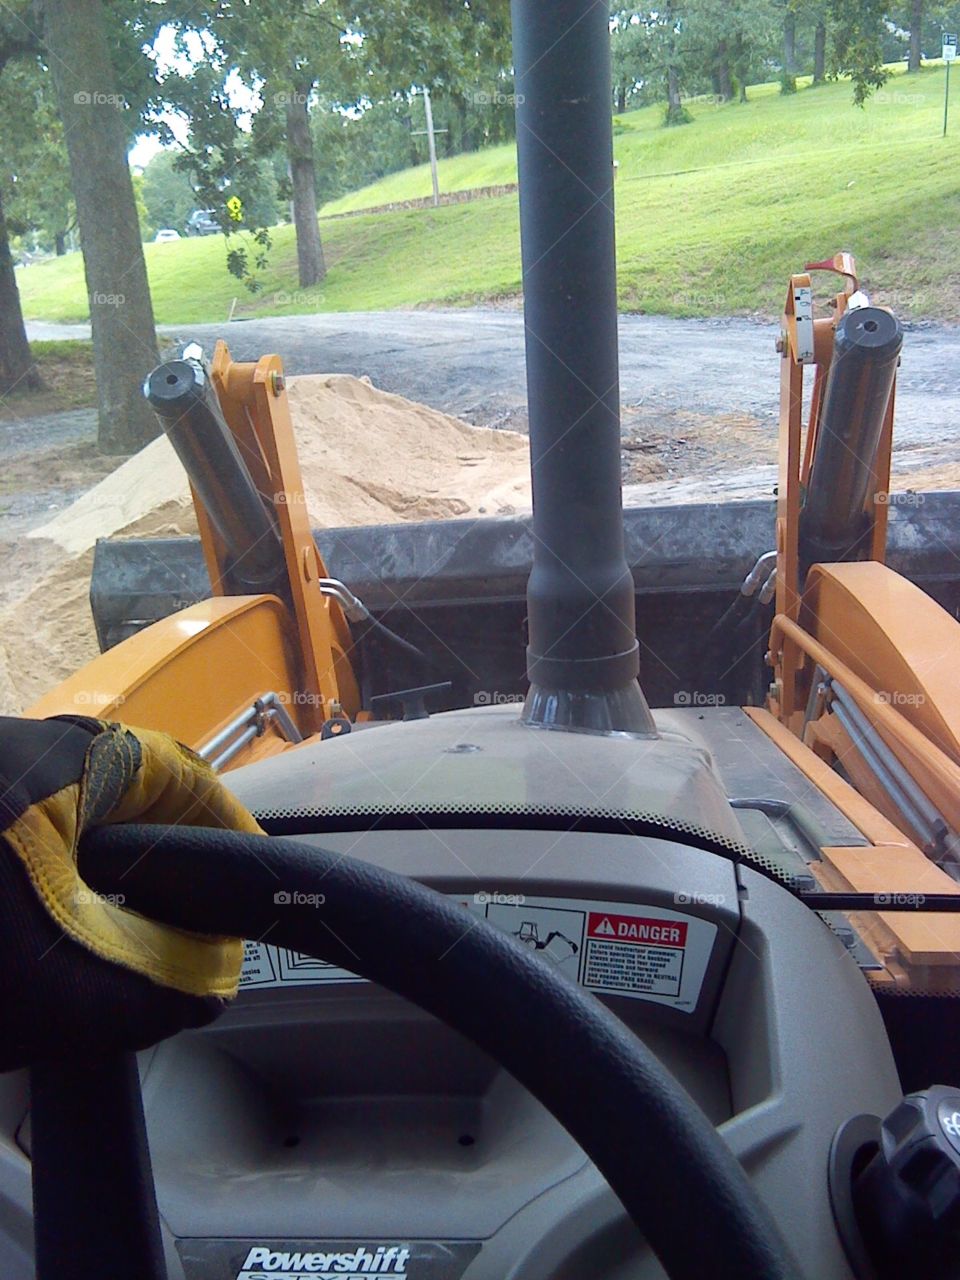 Working the backhoe in the park